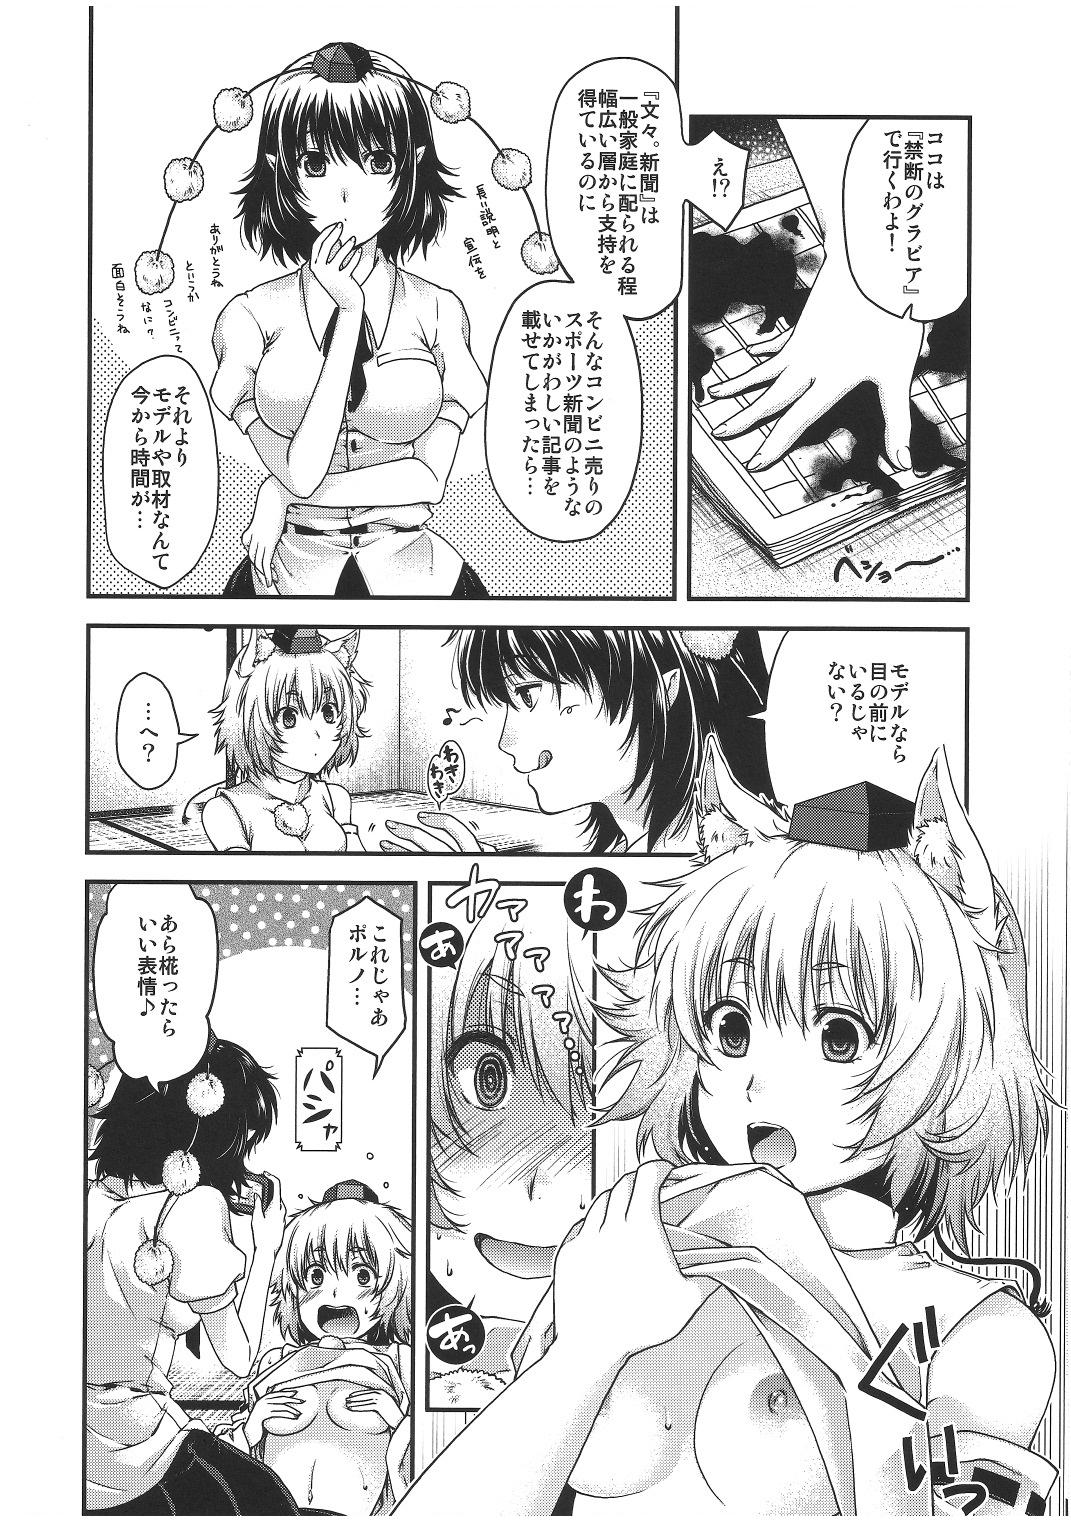 Cams YRDK - Touhou project Slim - Page 5